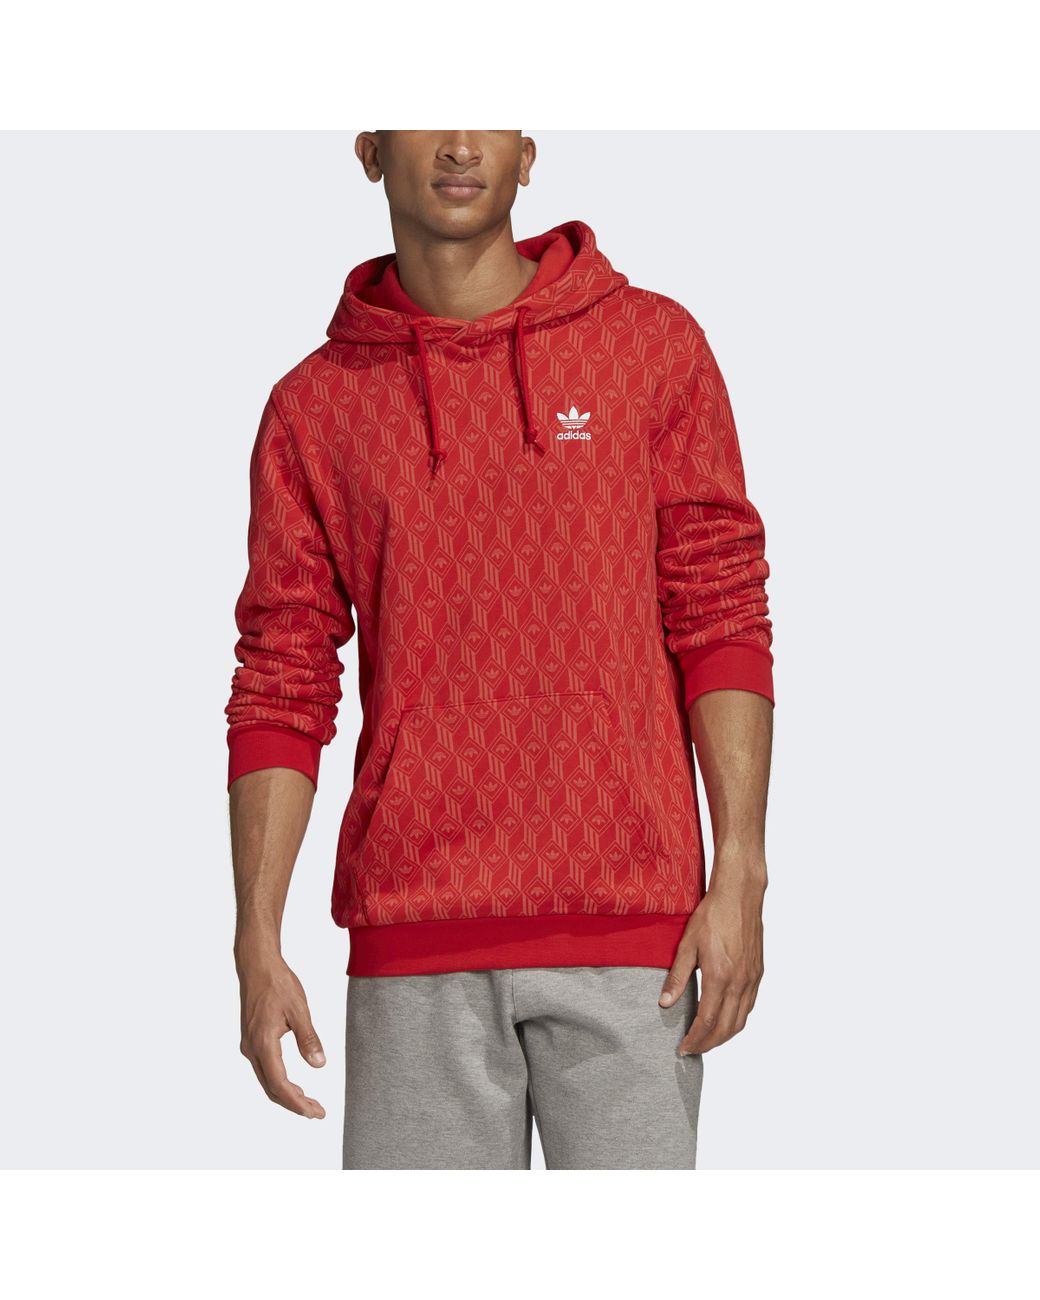 adidas Originals Cotton Allover Print Hoodie in Red for Men - Lyst